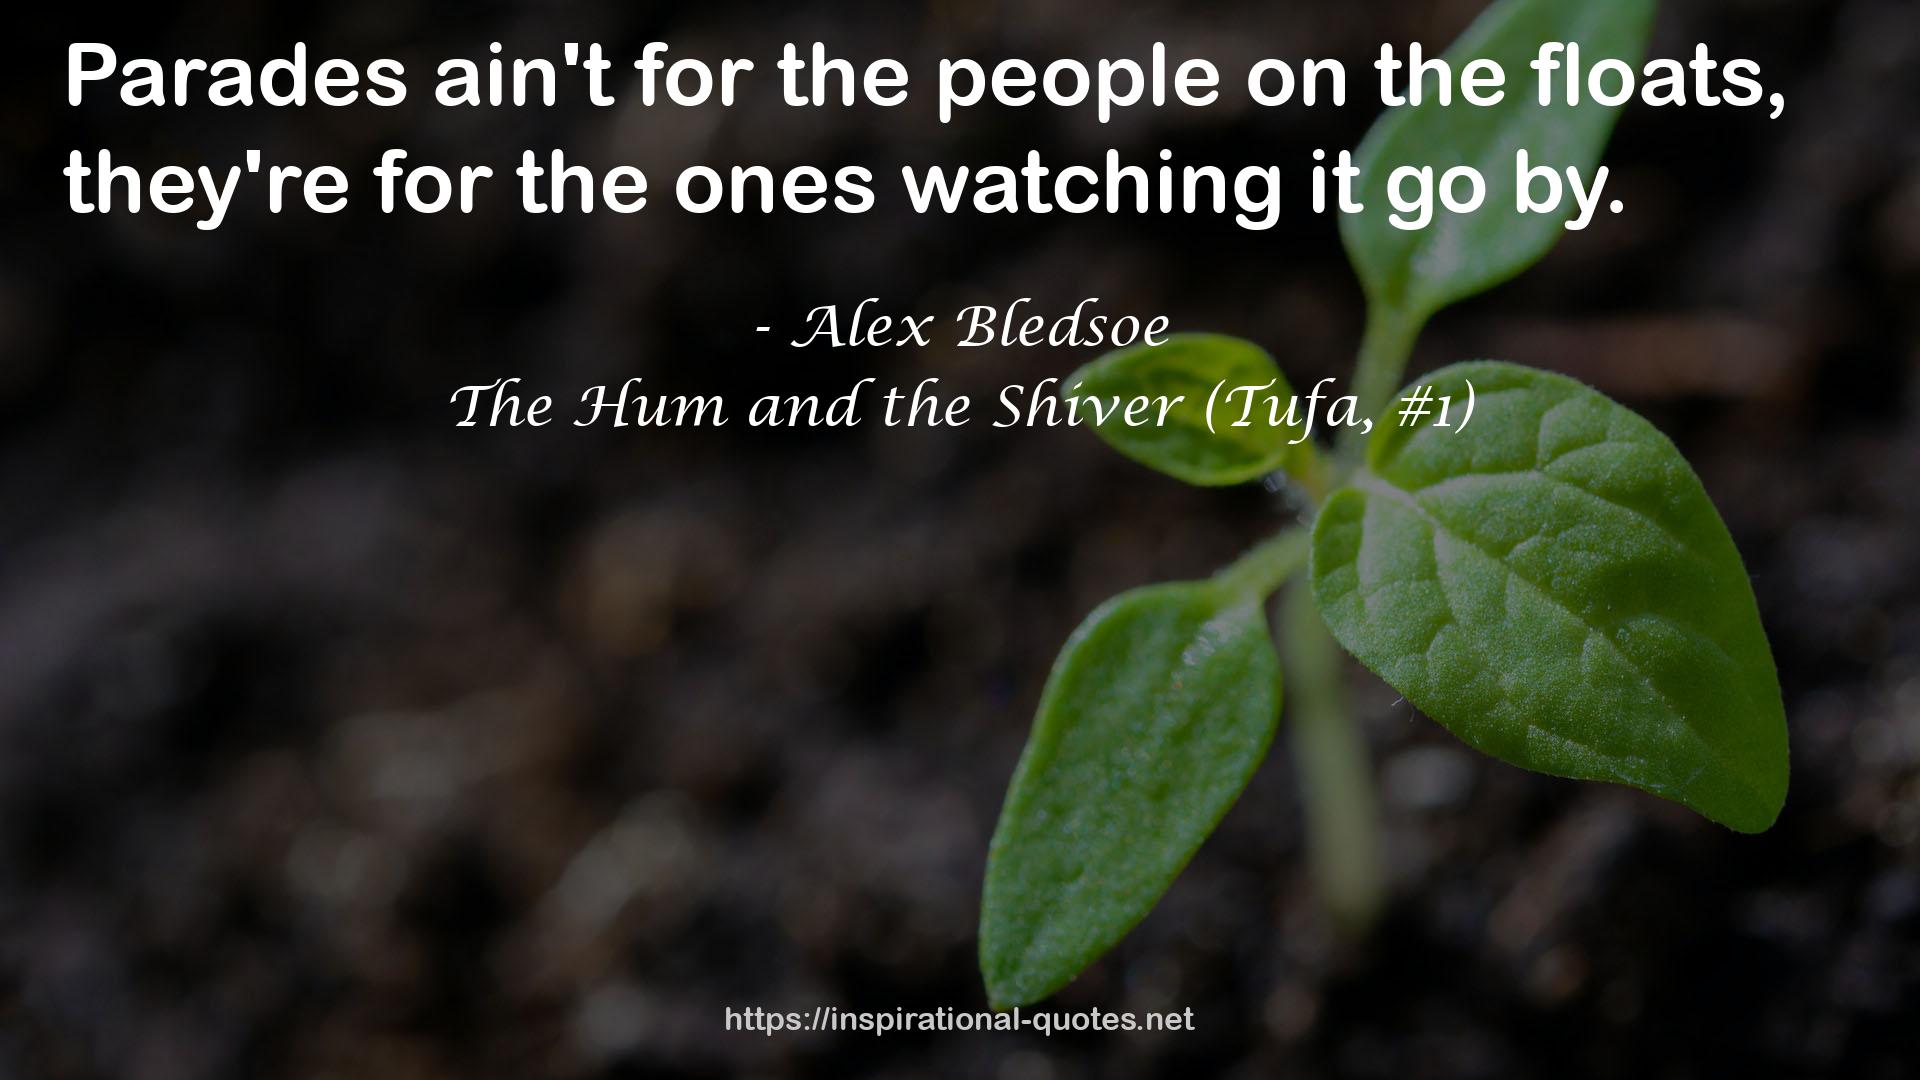 The Hum and the Shiver (Tufa, #1) QUOTES